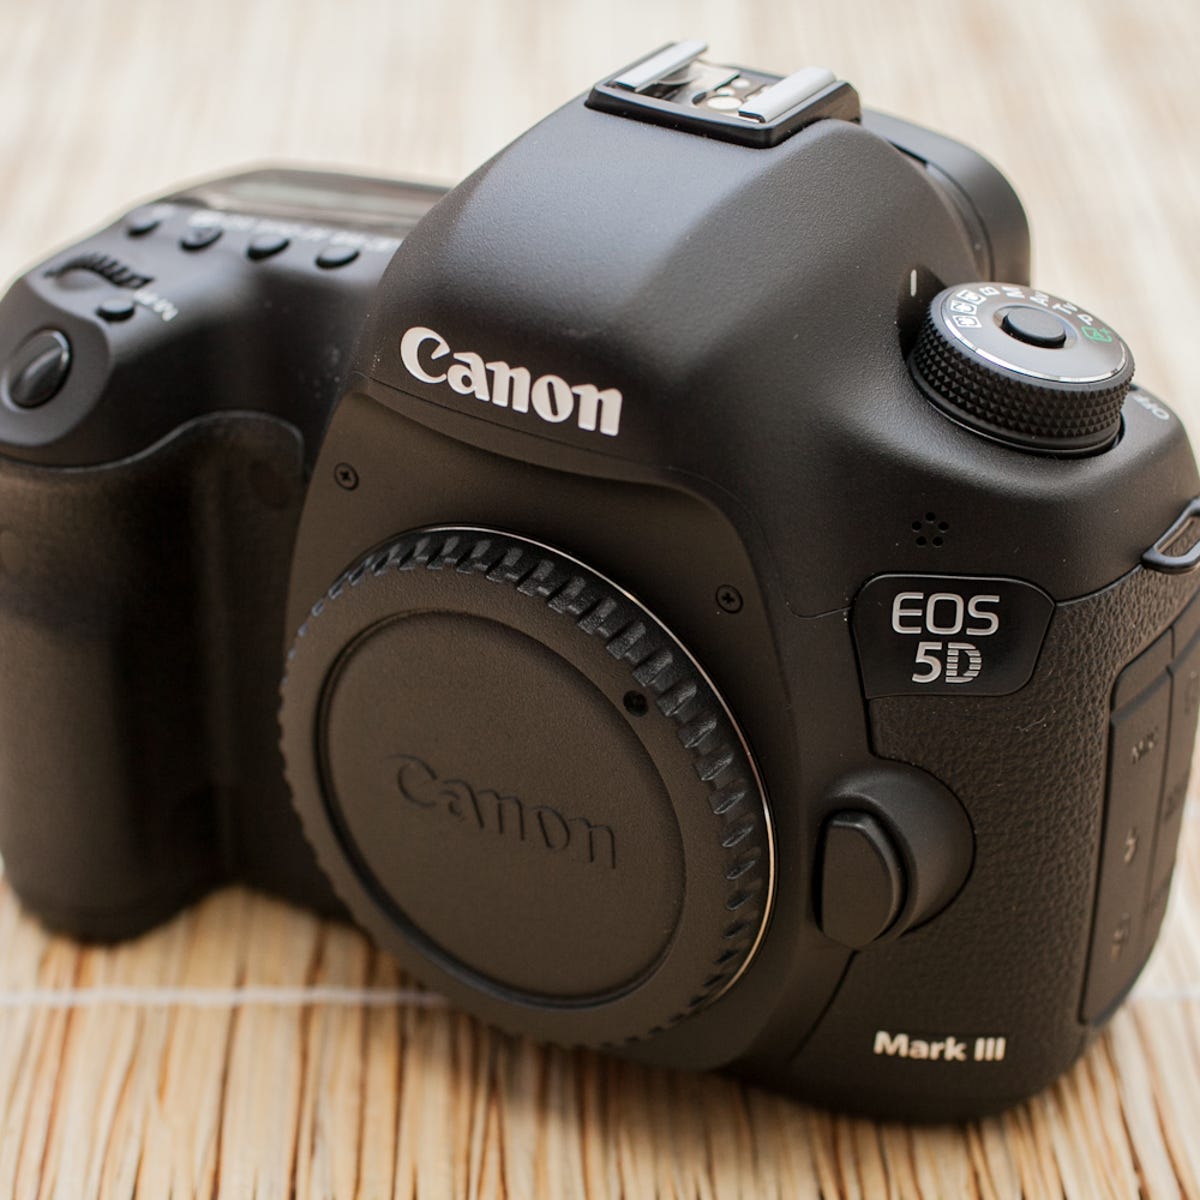 chaos Chip Kijkgat Canon EOS 5D Mark III review: Canon EOS 5D Mark III - CNET